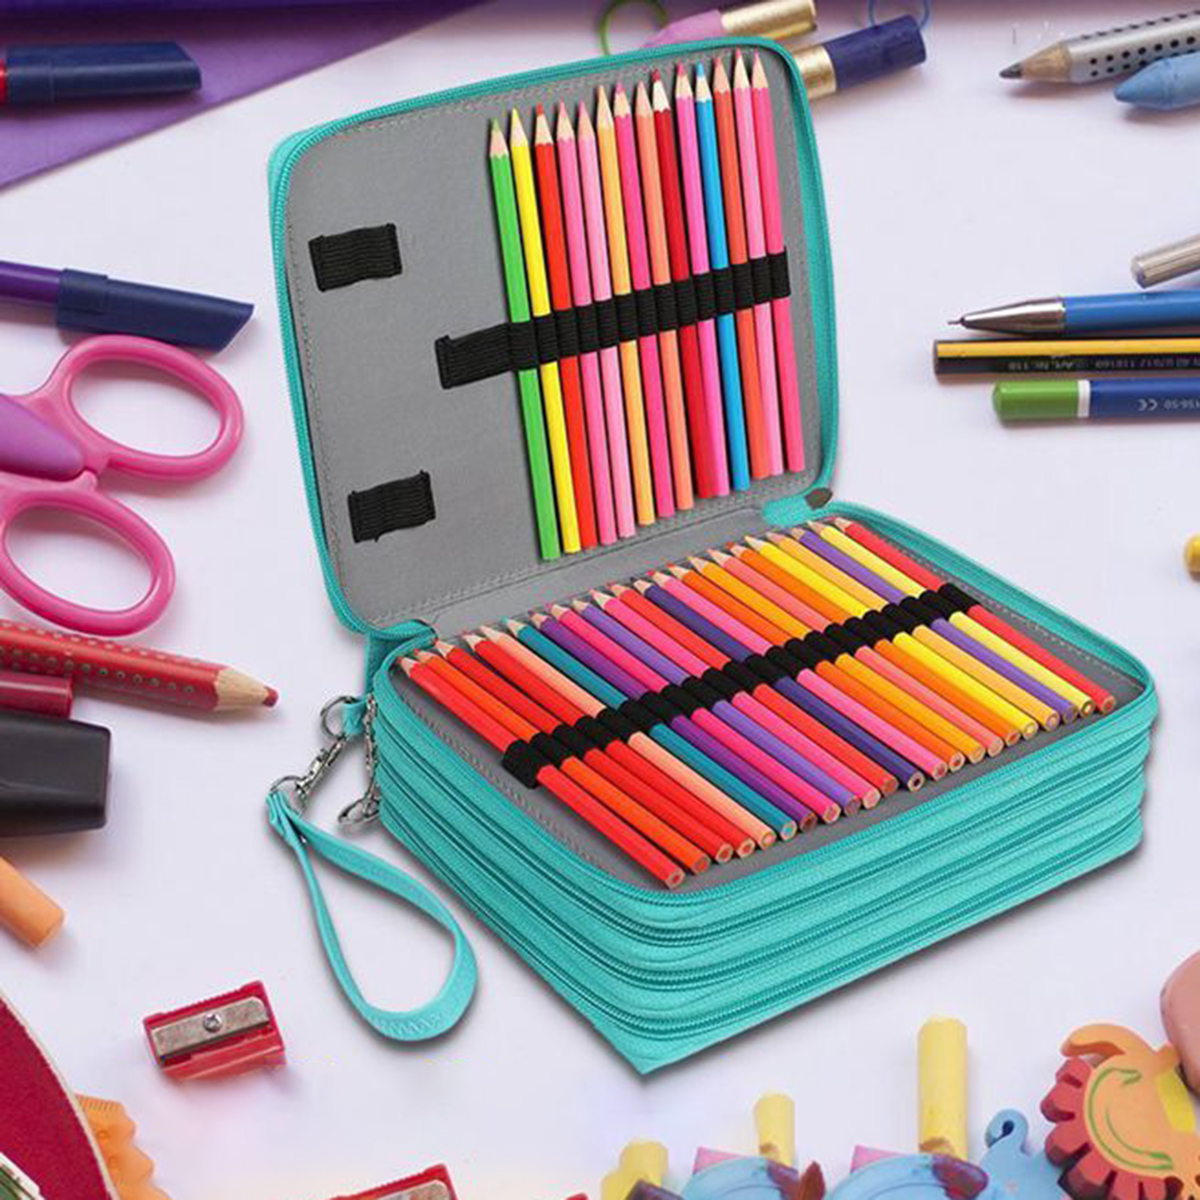 1-Piece-168-Slots-Colored-Pencil-Case-Large-Capacity-Soft-PU-Leather-Pencils-Holder-Organizer-with-C-1635702-2